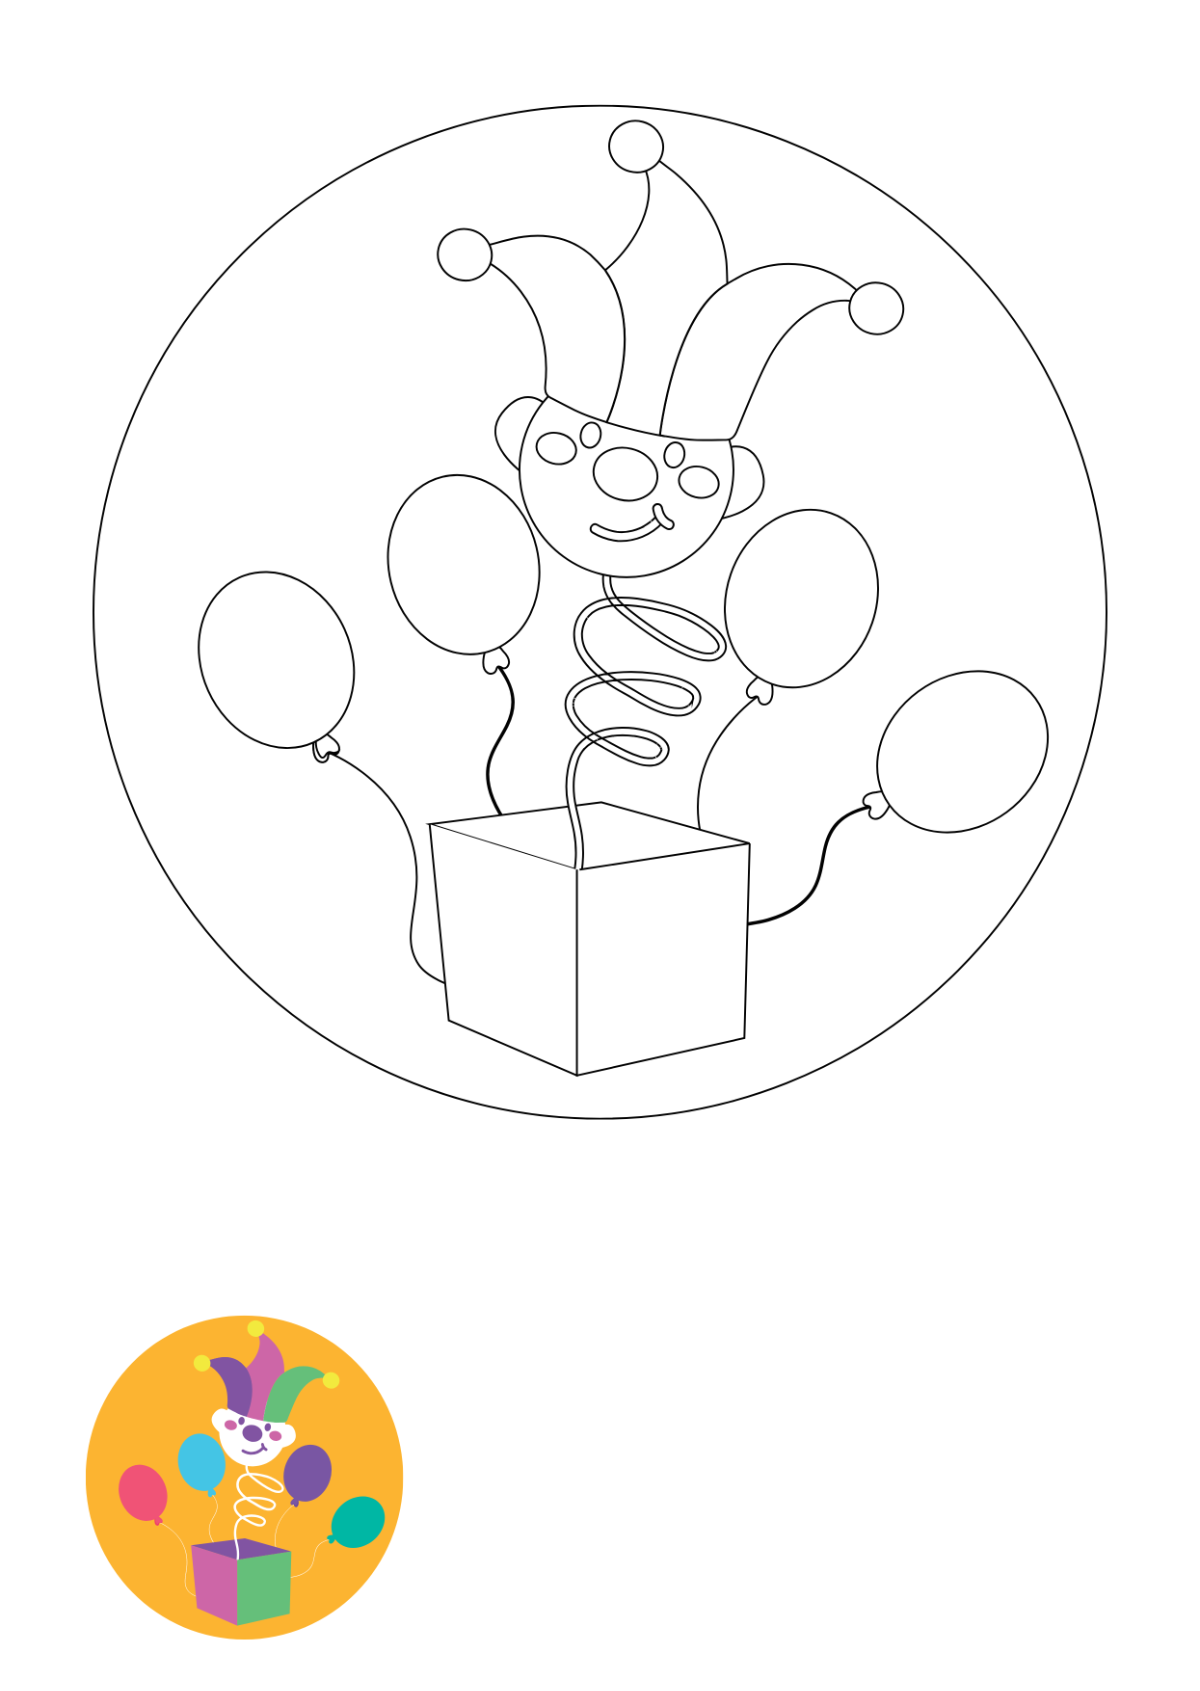 Free April Fools’ Day Coloring Page Template